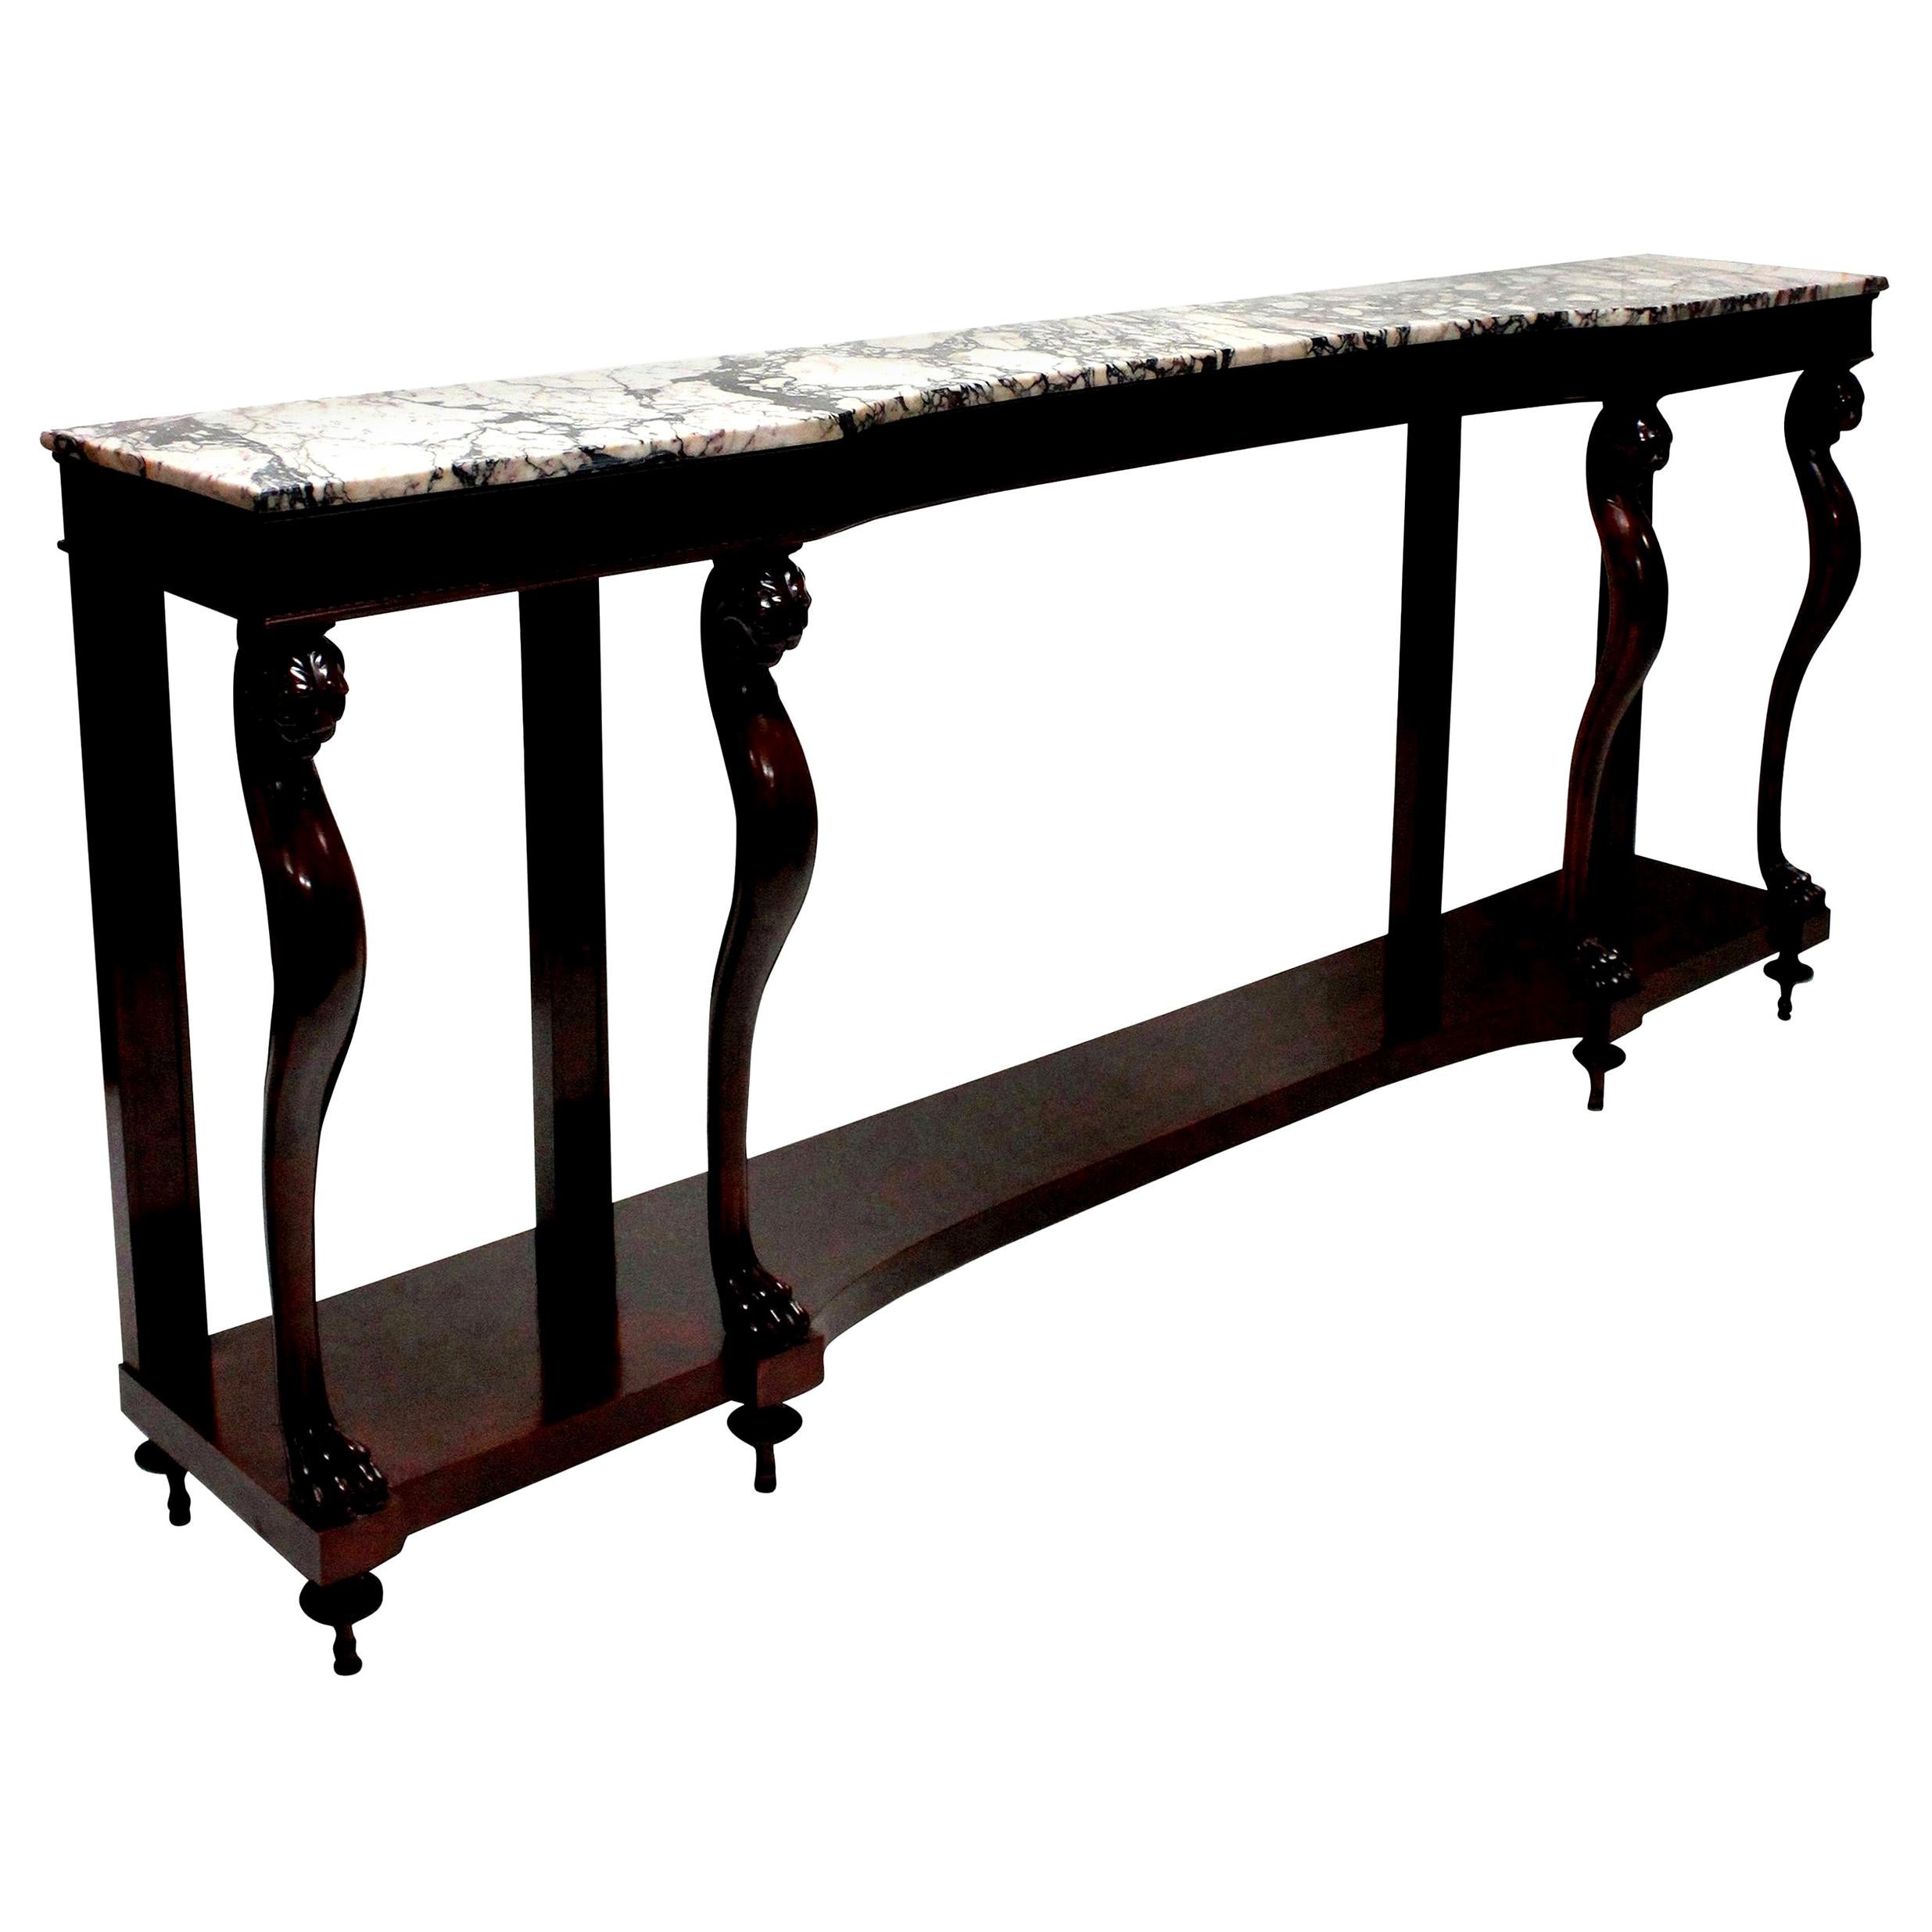 Monumental Italian Neoclassical Marble-Top Console Table